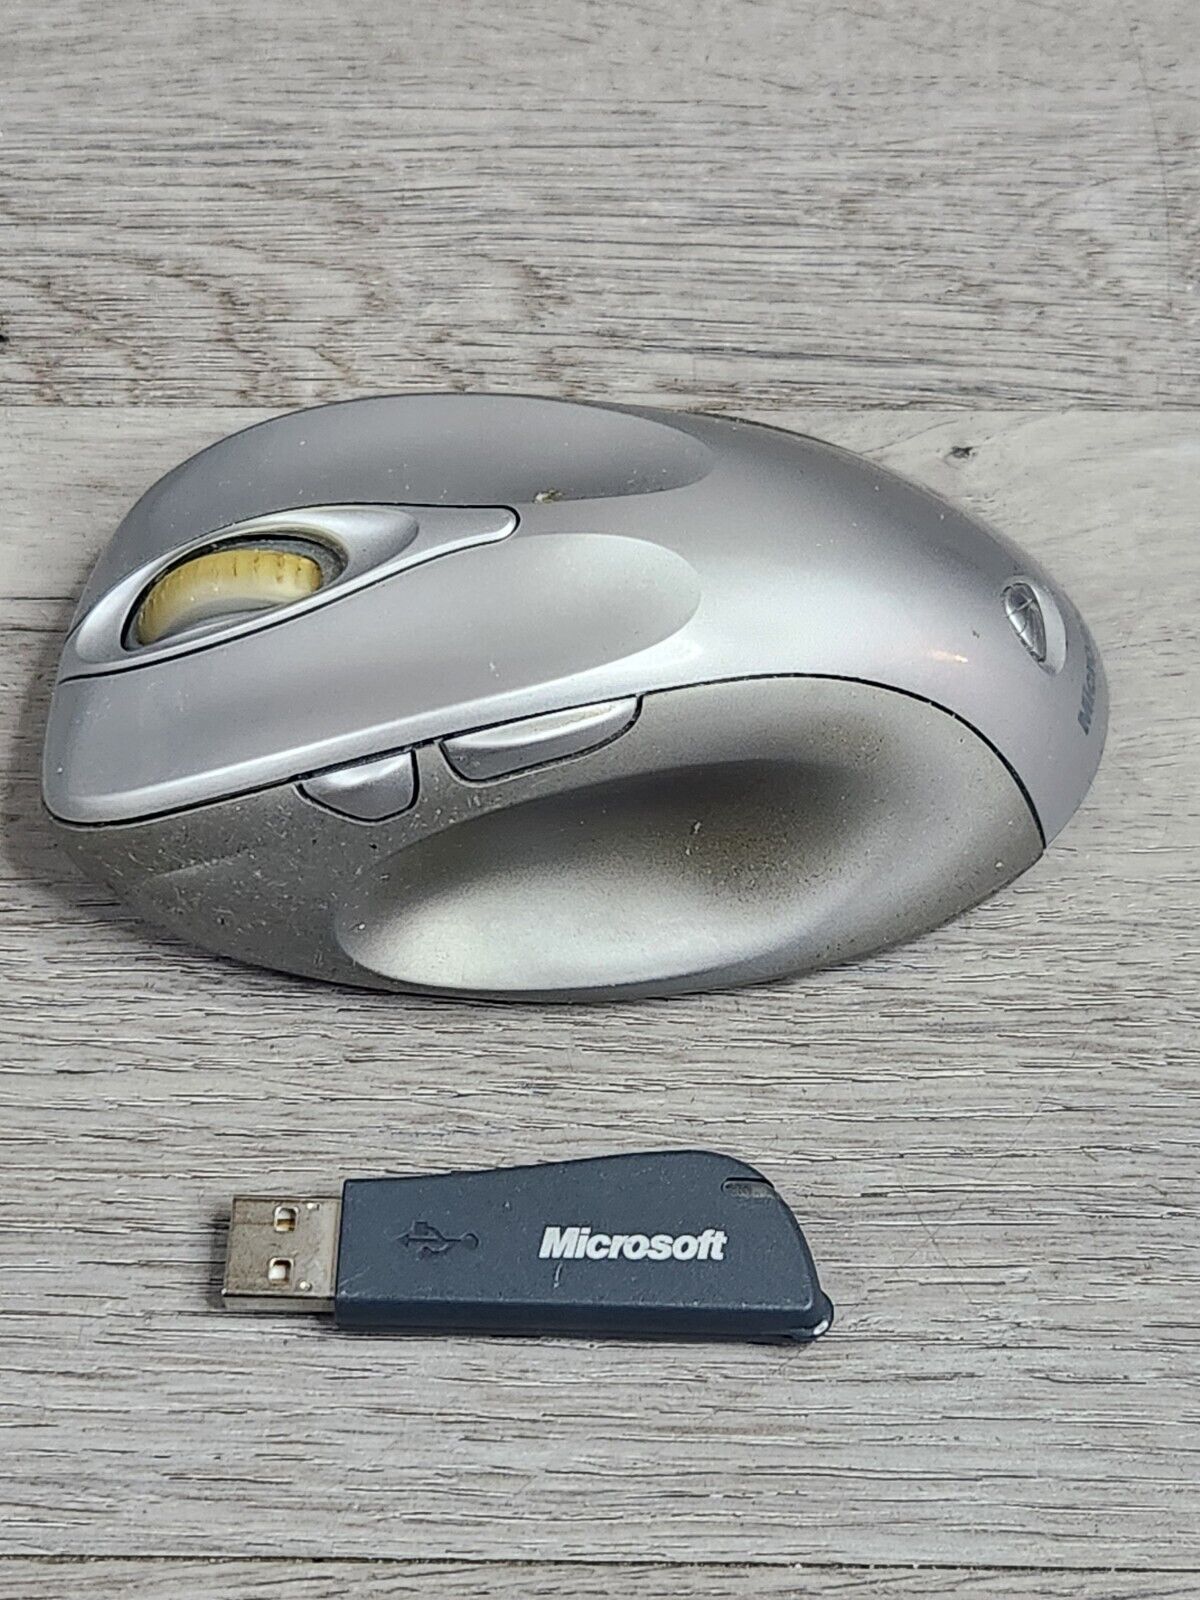 Microsoft Wireless Laser Mouse 6000 Silver Model 1052 w/ Receiver Tested oem